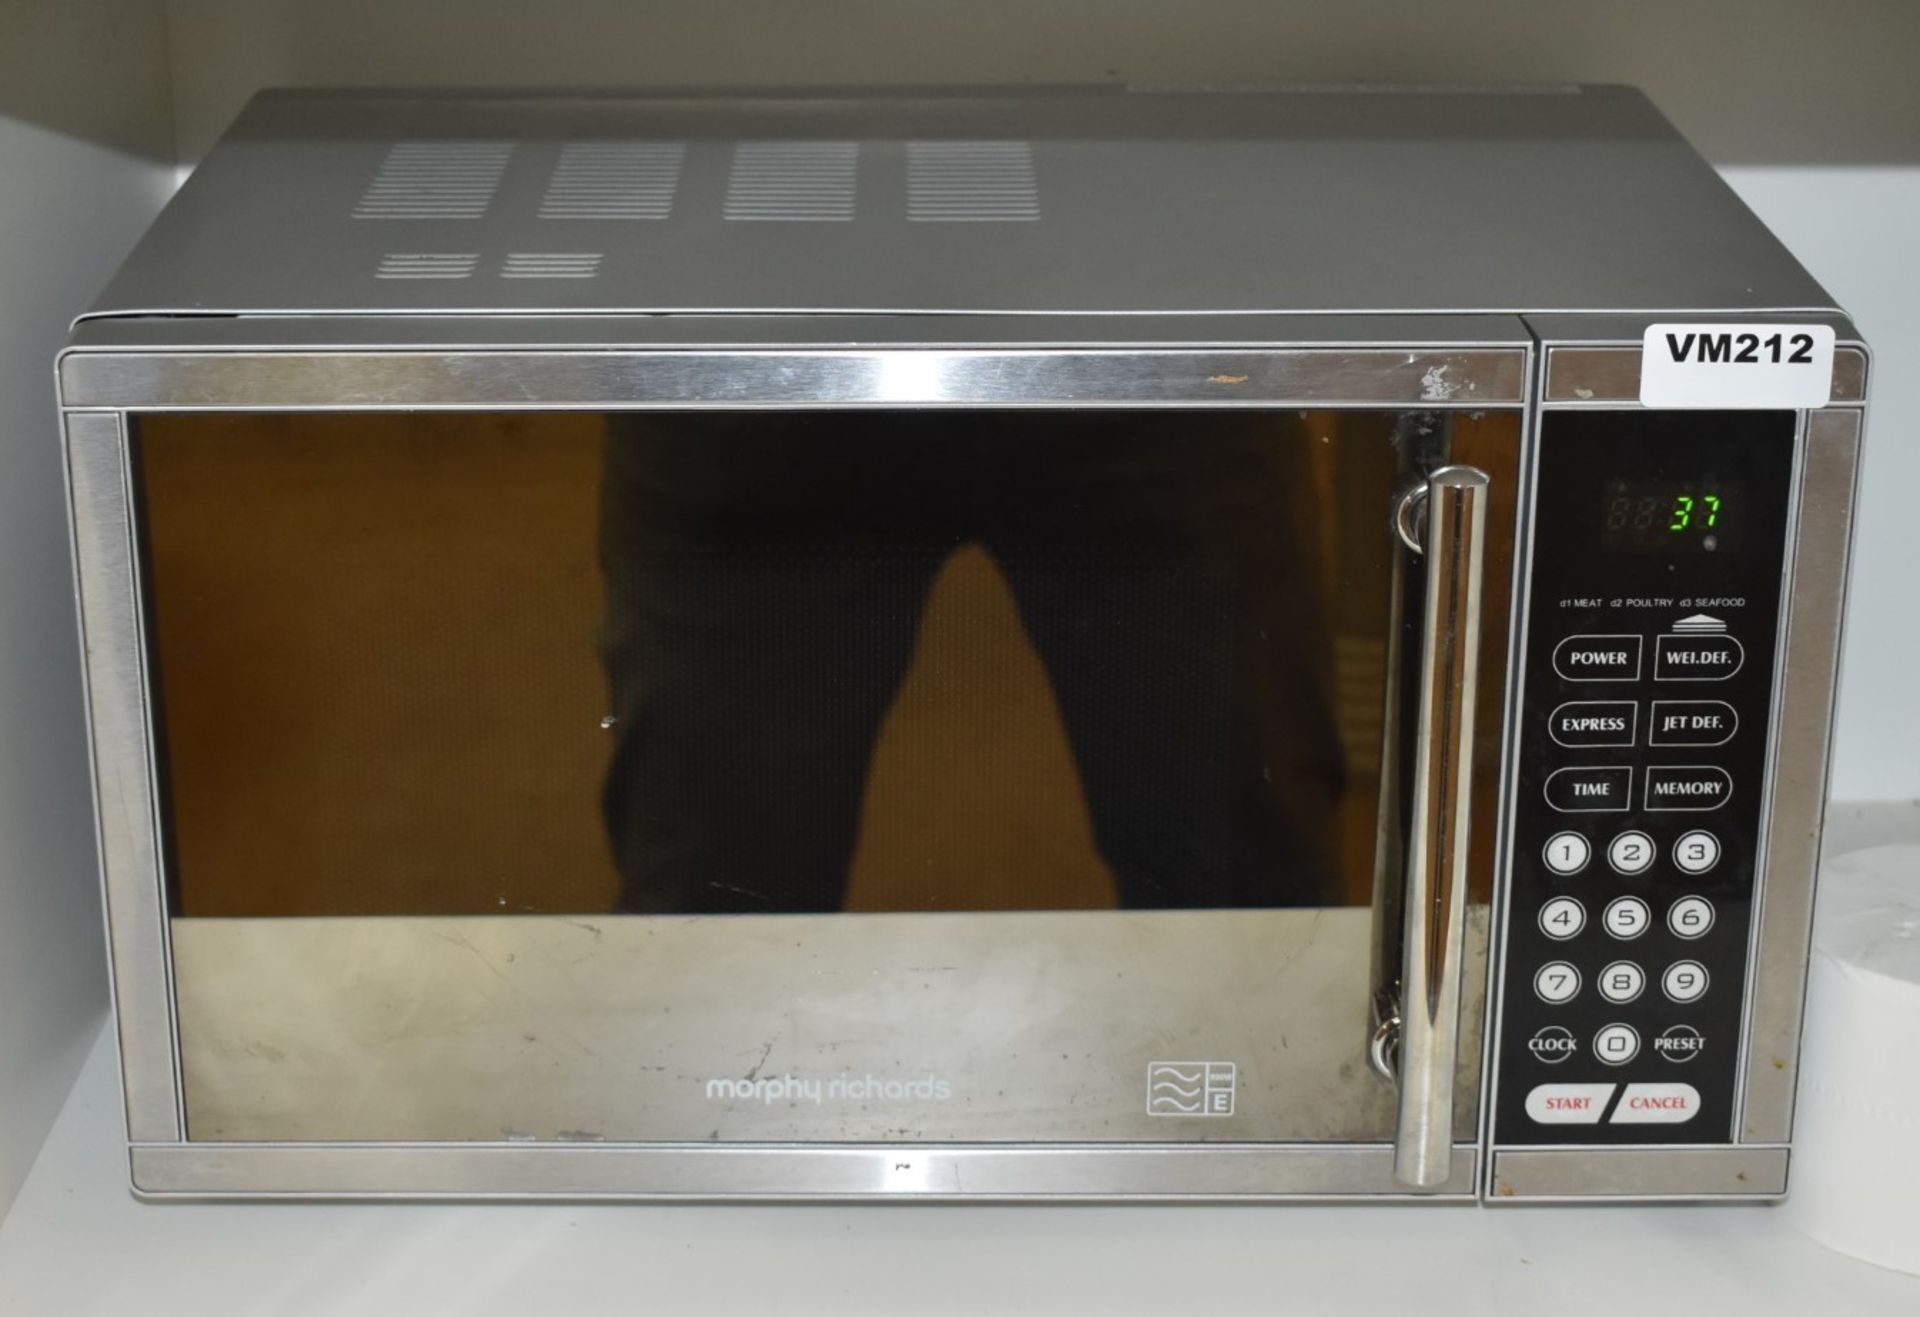 1 x Morphy Richards 900w Microwave Oven With Chrome Finish Ref VM212 B2 - CL409 - Location: